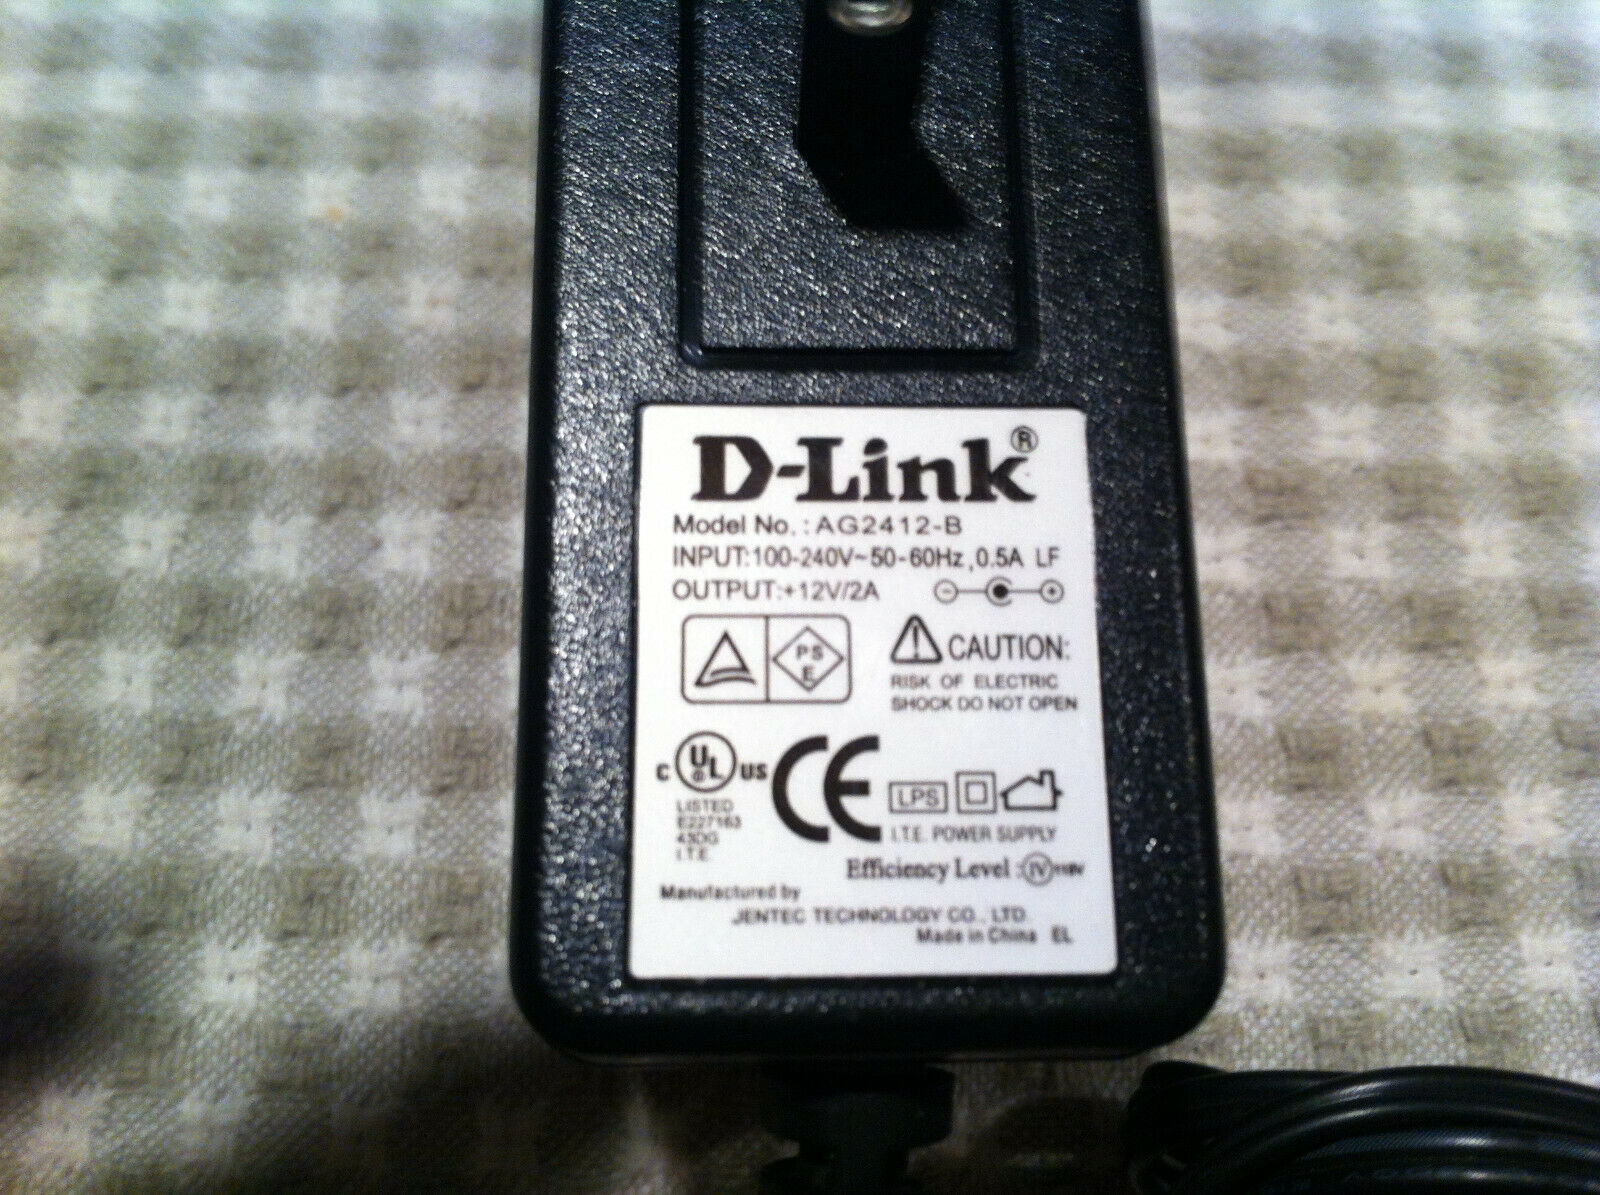 NEW 12V 2A D-Link AG2412-B ac adapter for D-Link DIR-655 Router Switching Power - Click Image to Close